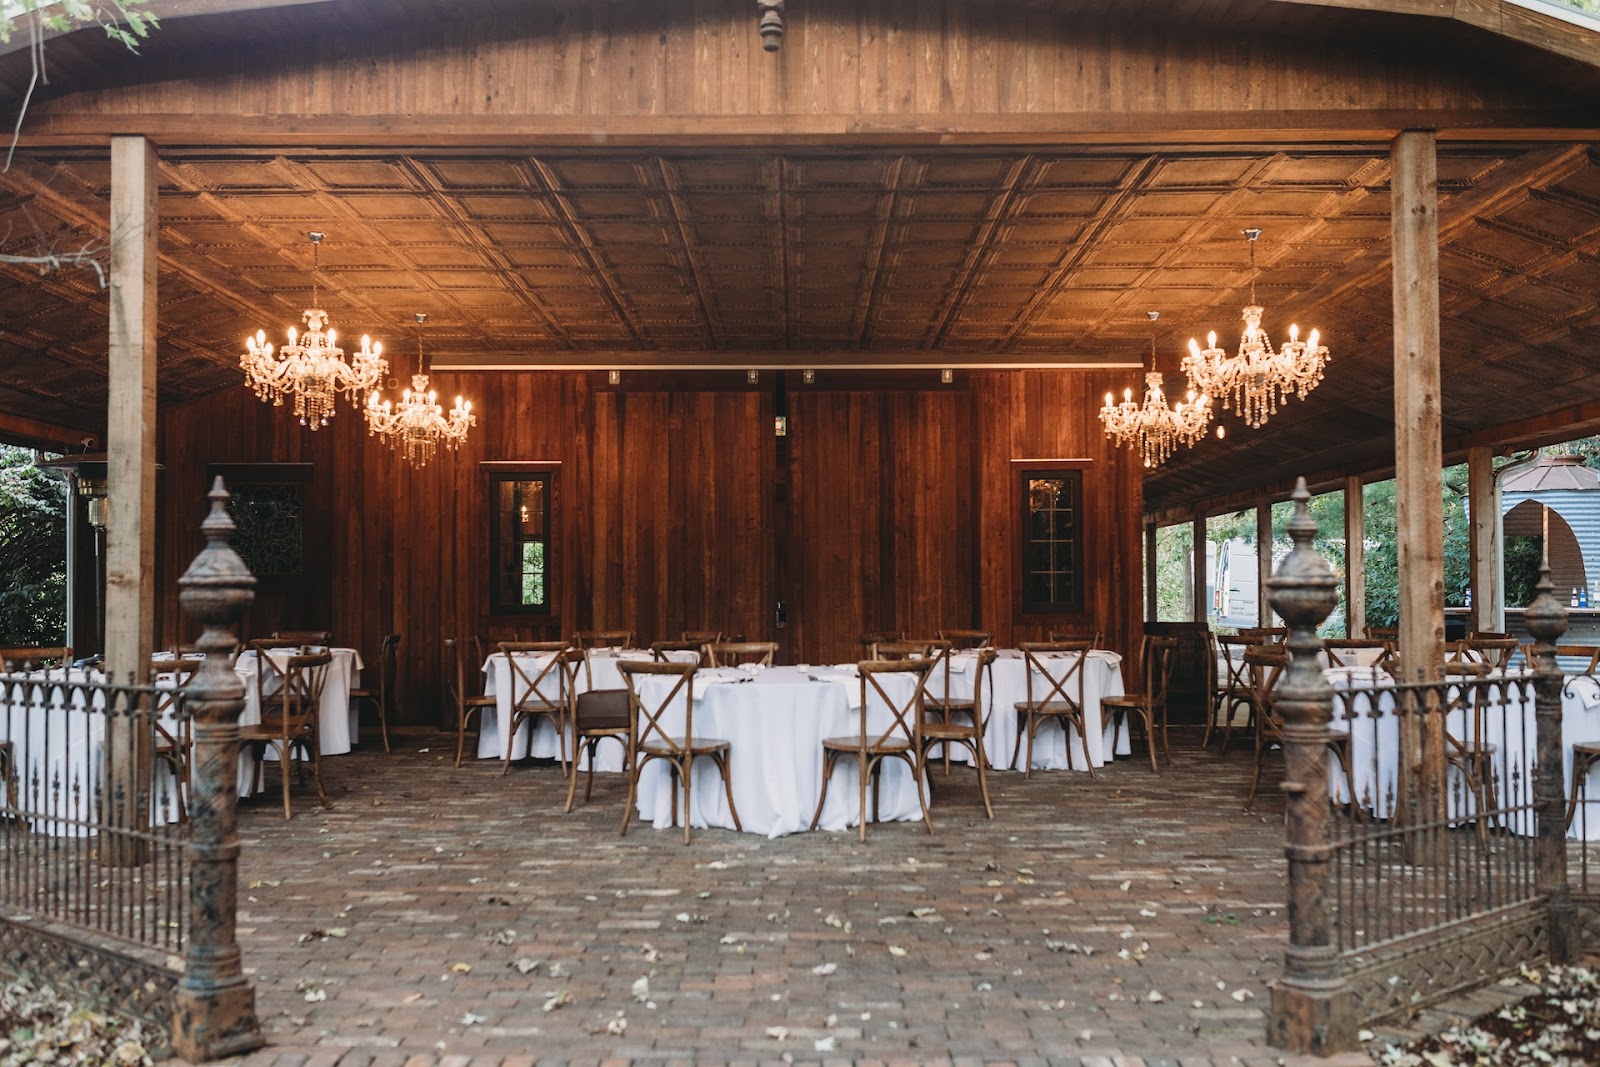 A rustic wedding reception area with white tables and chandeliers, ready for wedding messages to a couple